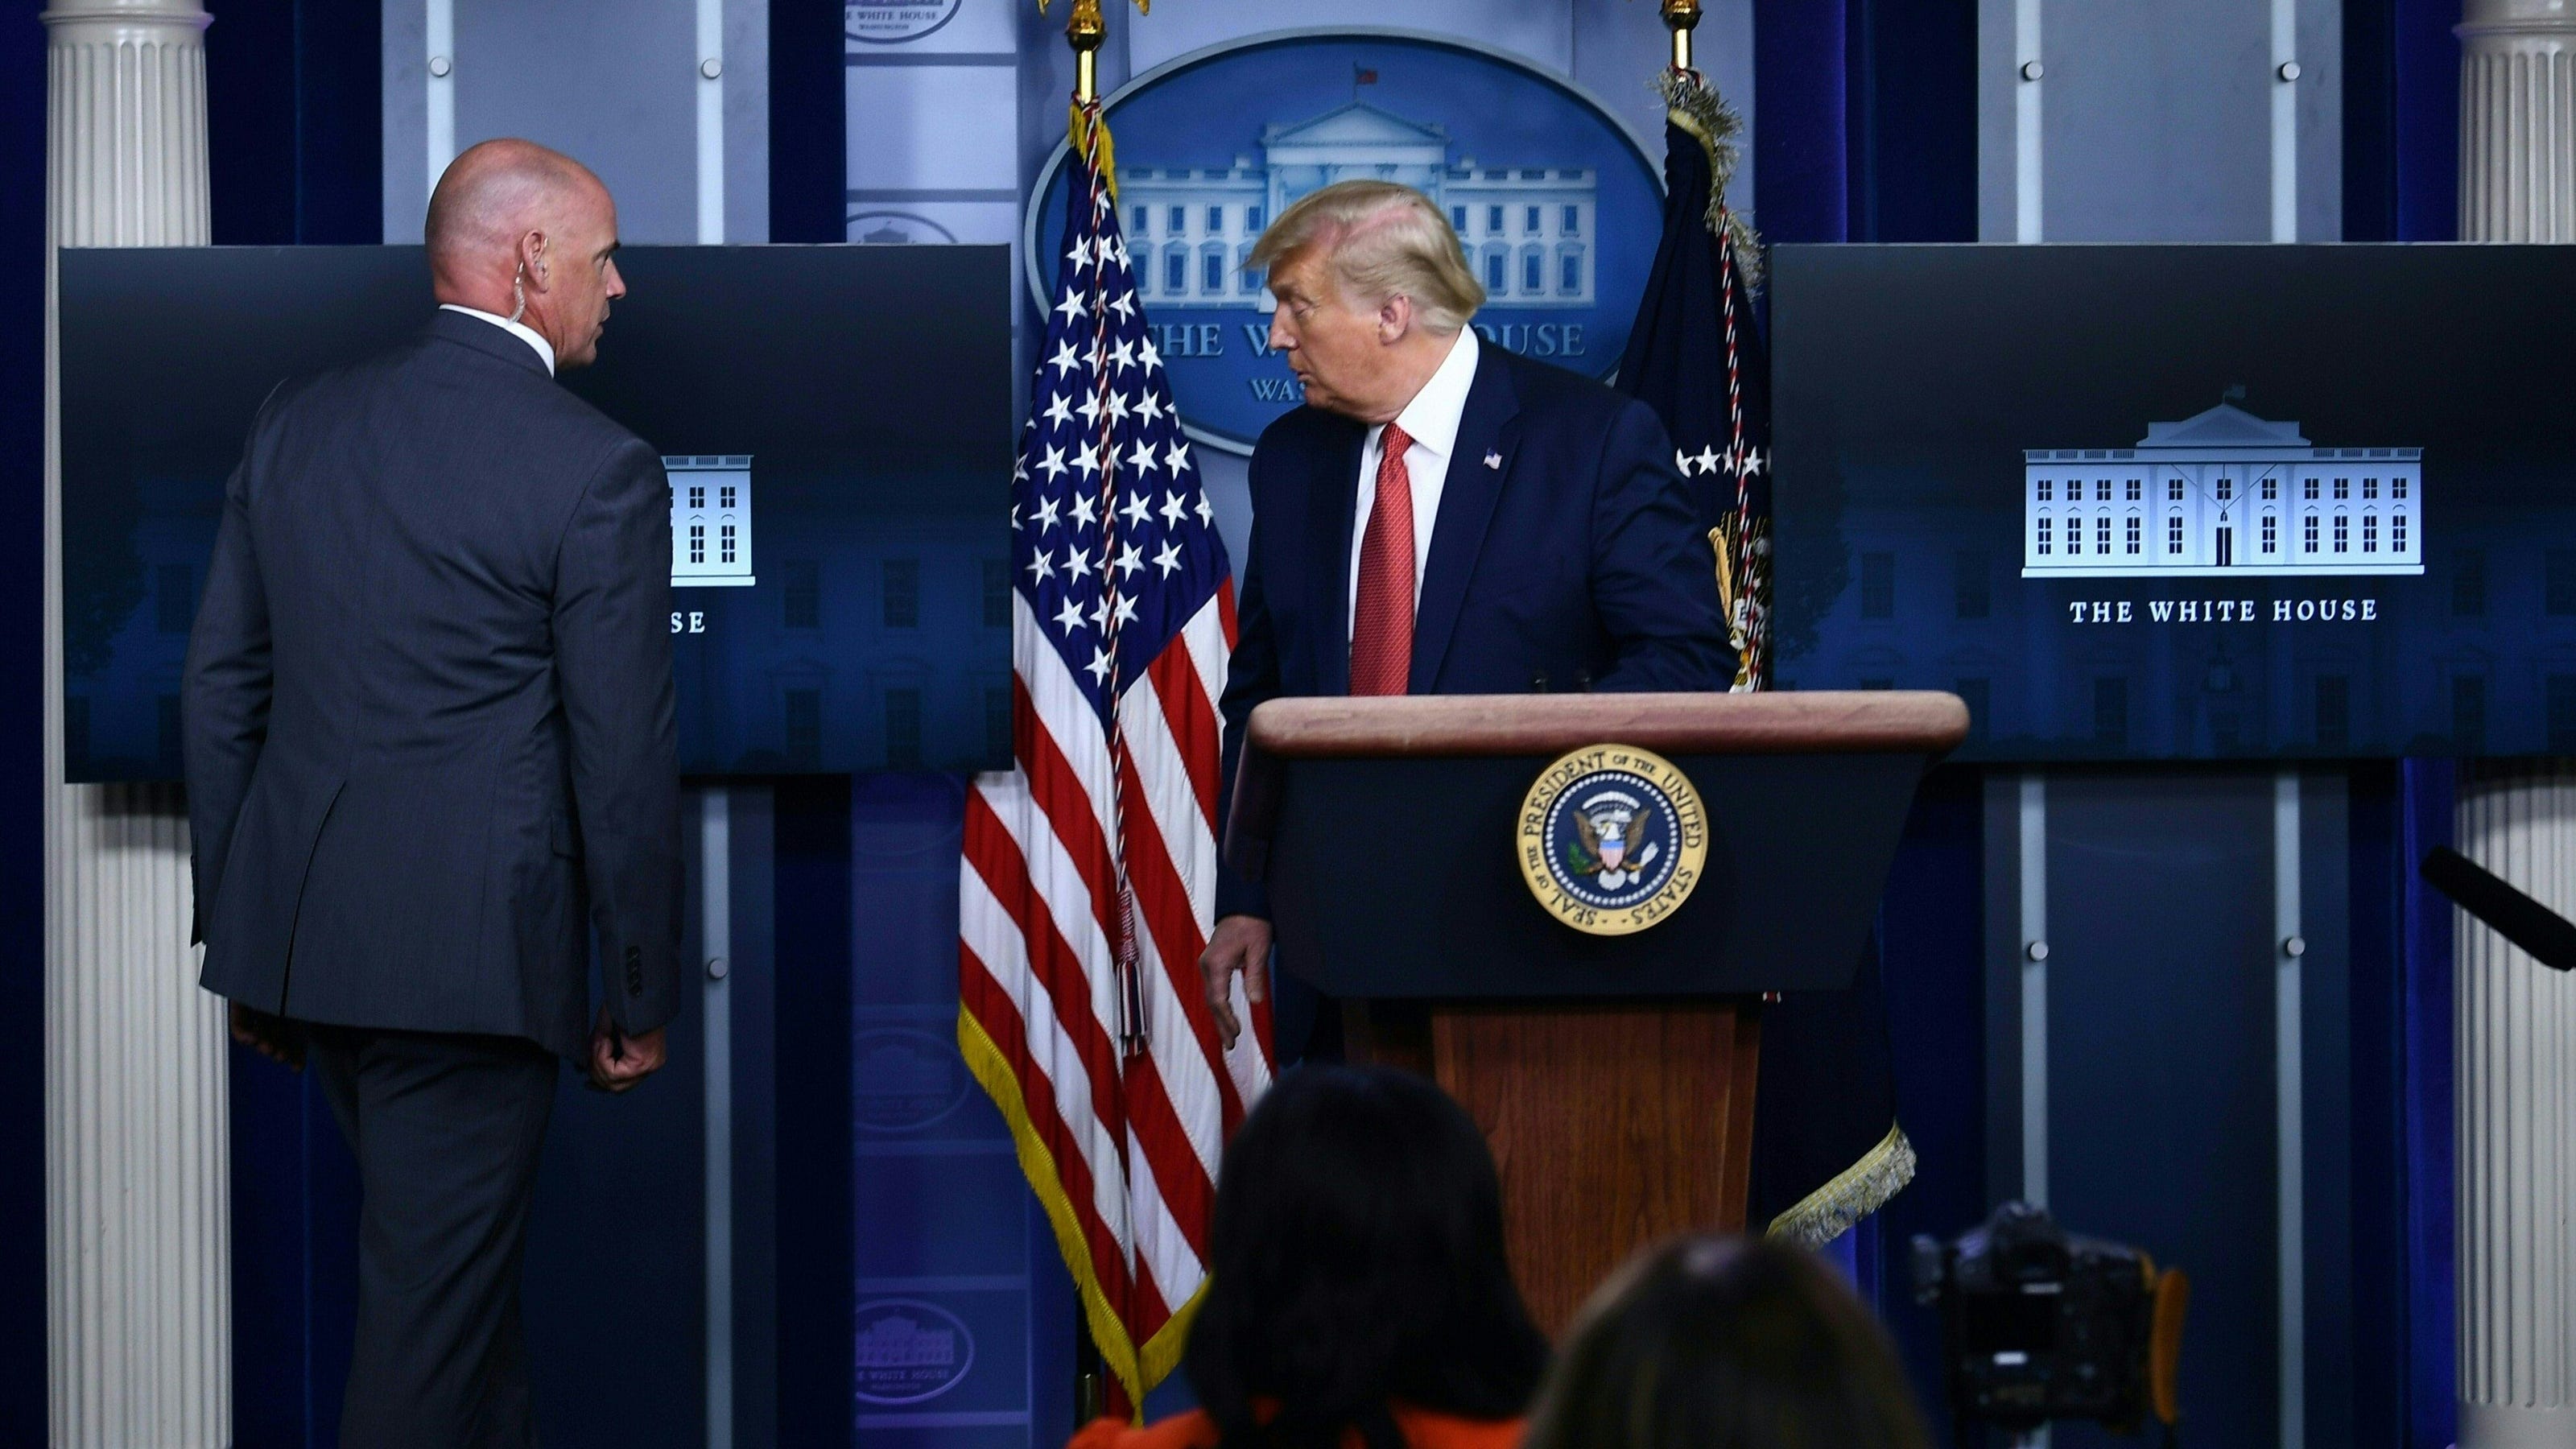 Trump abruptly pulled out of briefing as White House goes into lockdown following a shooting